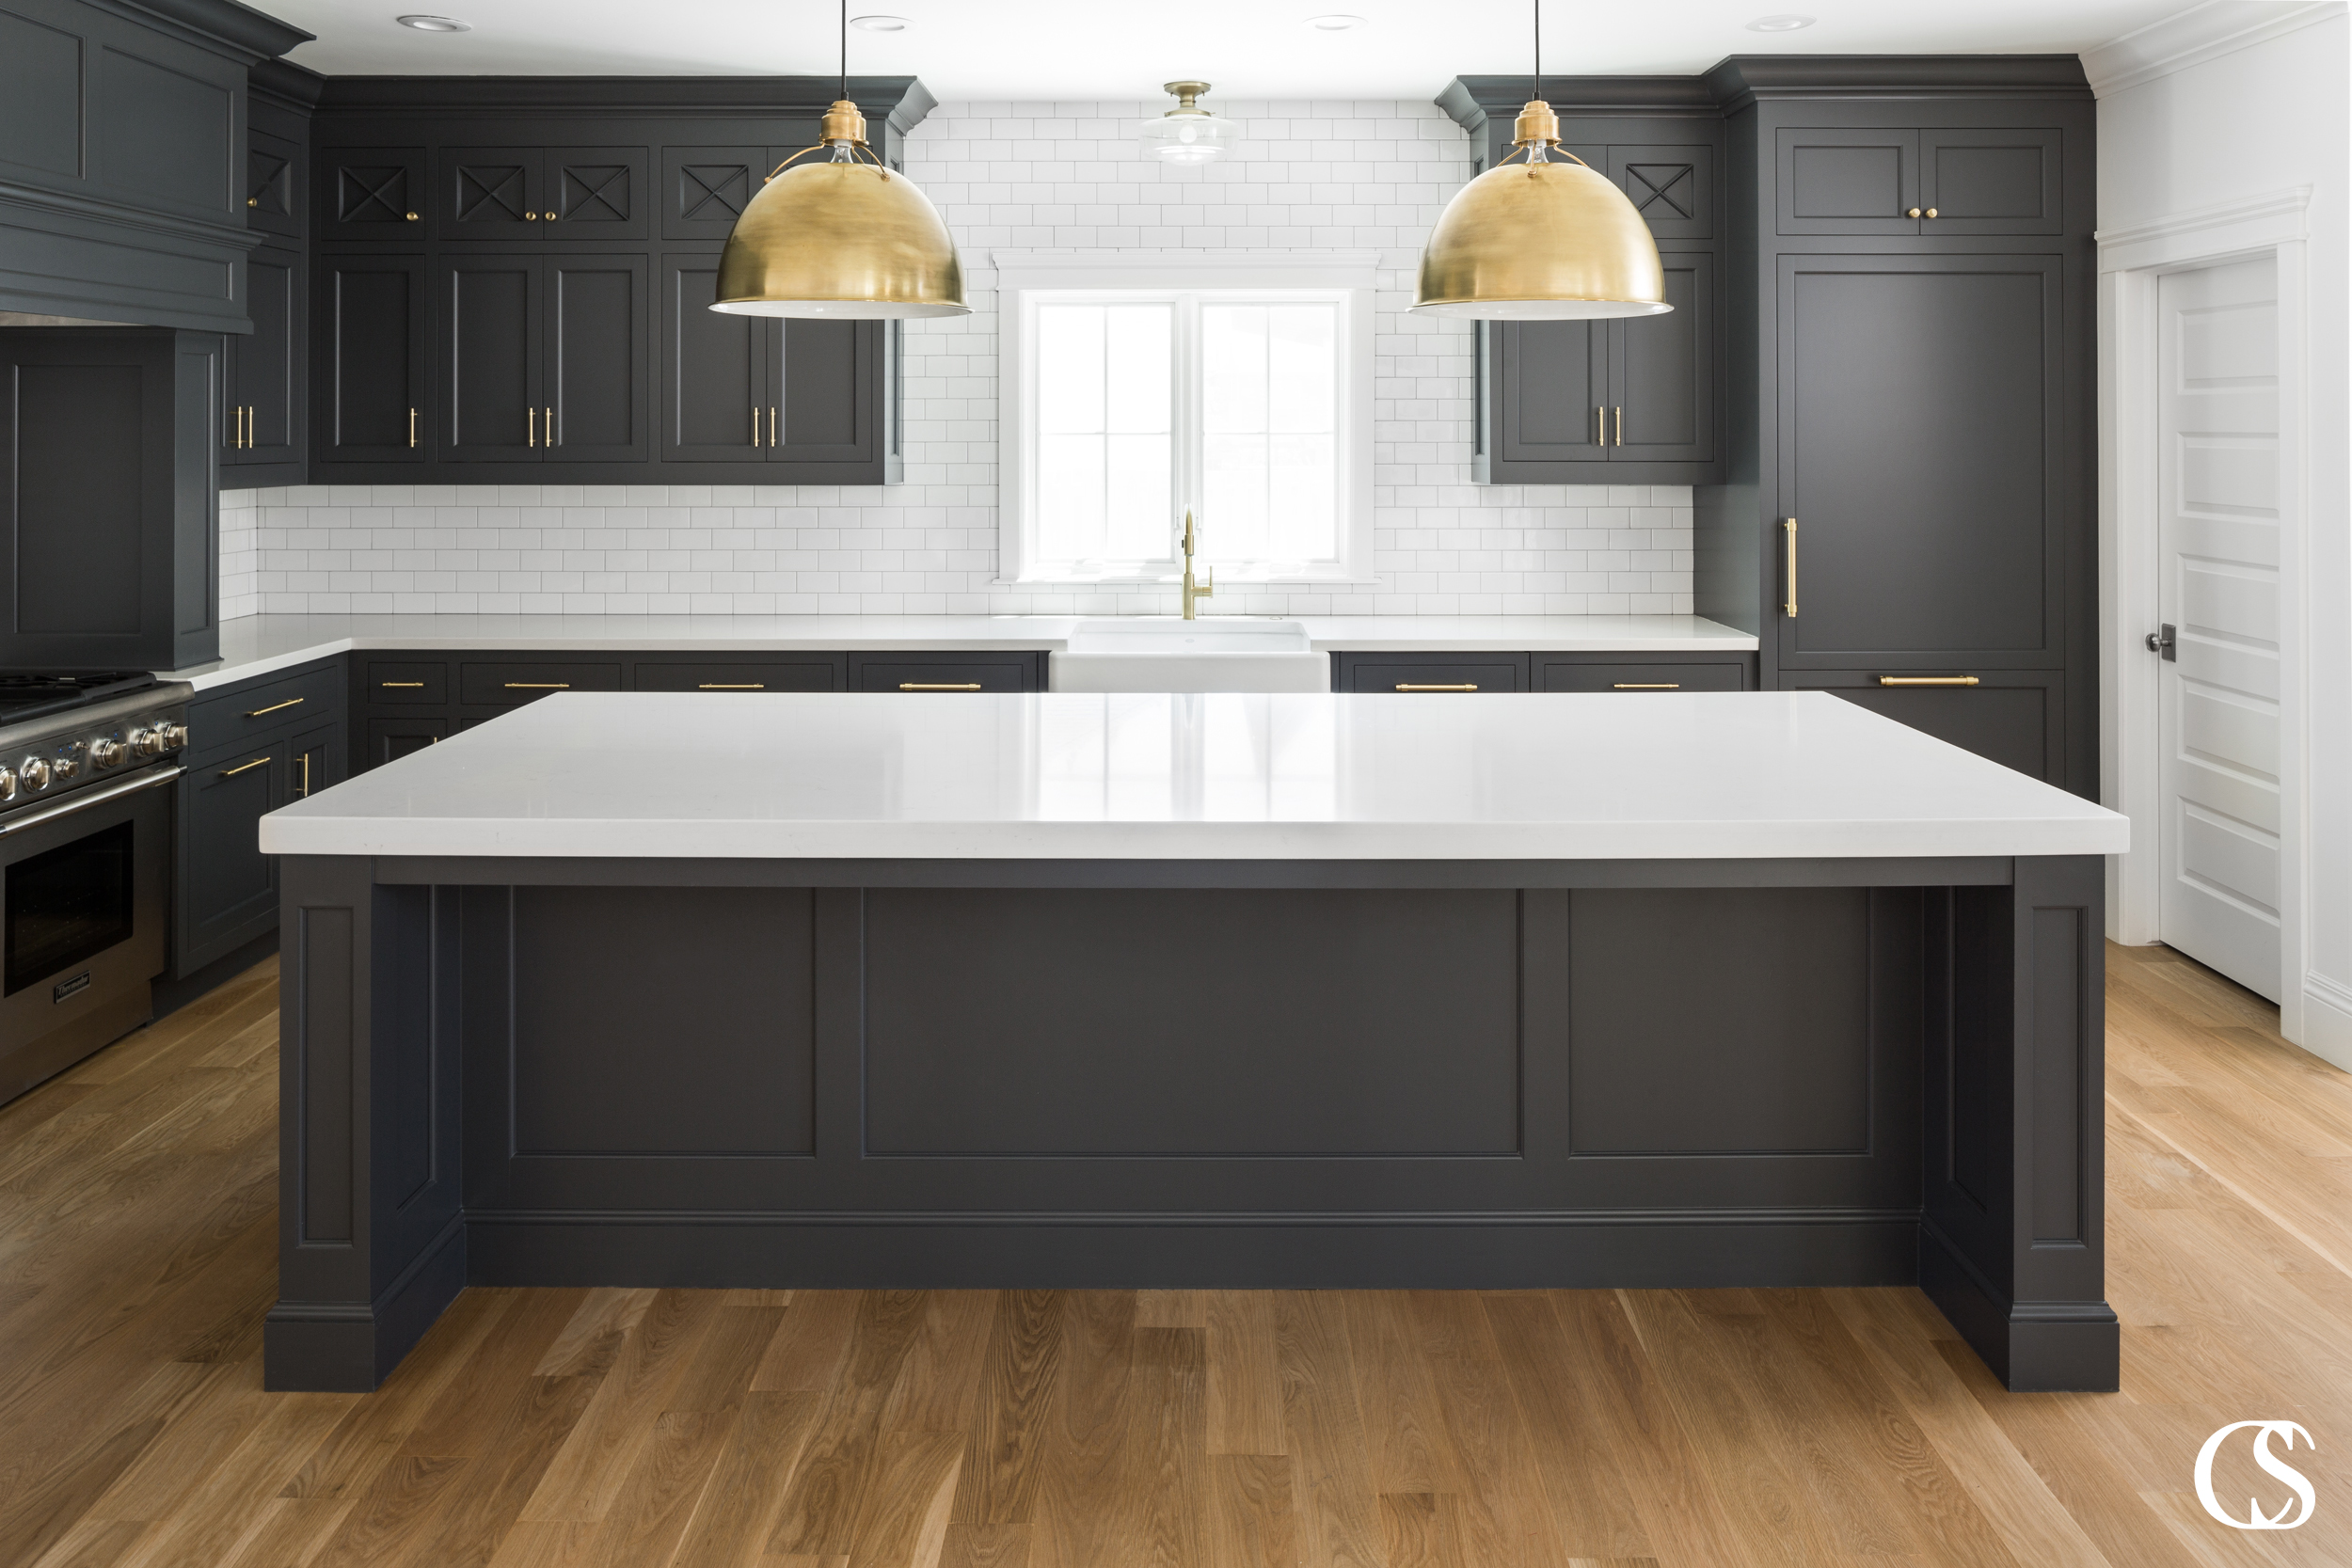 Island designs for the kitchen come in all shapes and sizes. The key is to make sure it creates enough usable space—think countertop work, storage, and seating—without overwhelming the room.